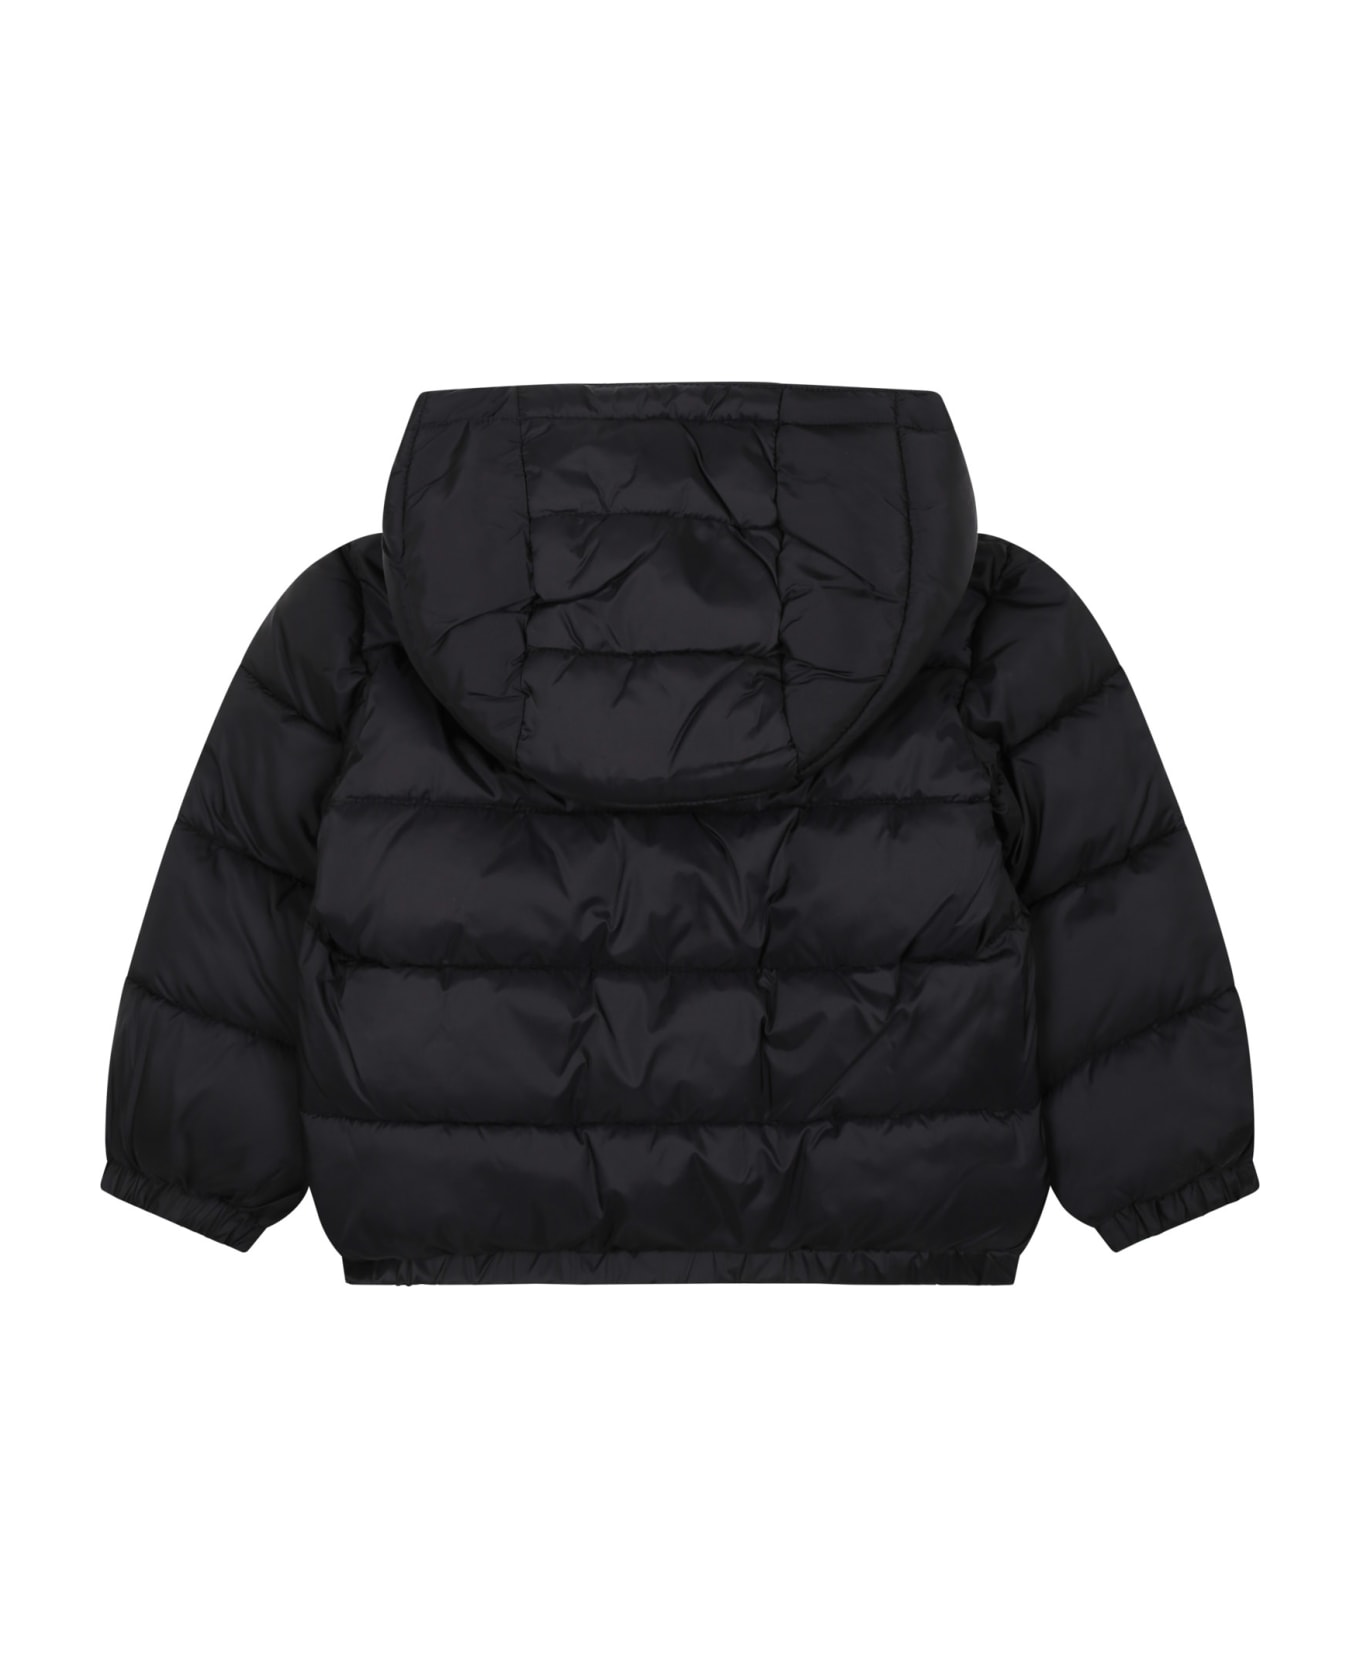 Moschino Black Down Jacket For Babies With Teddy Bear And Logo - Black